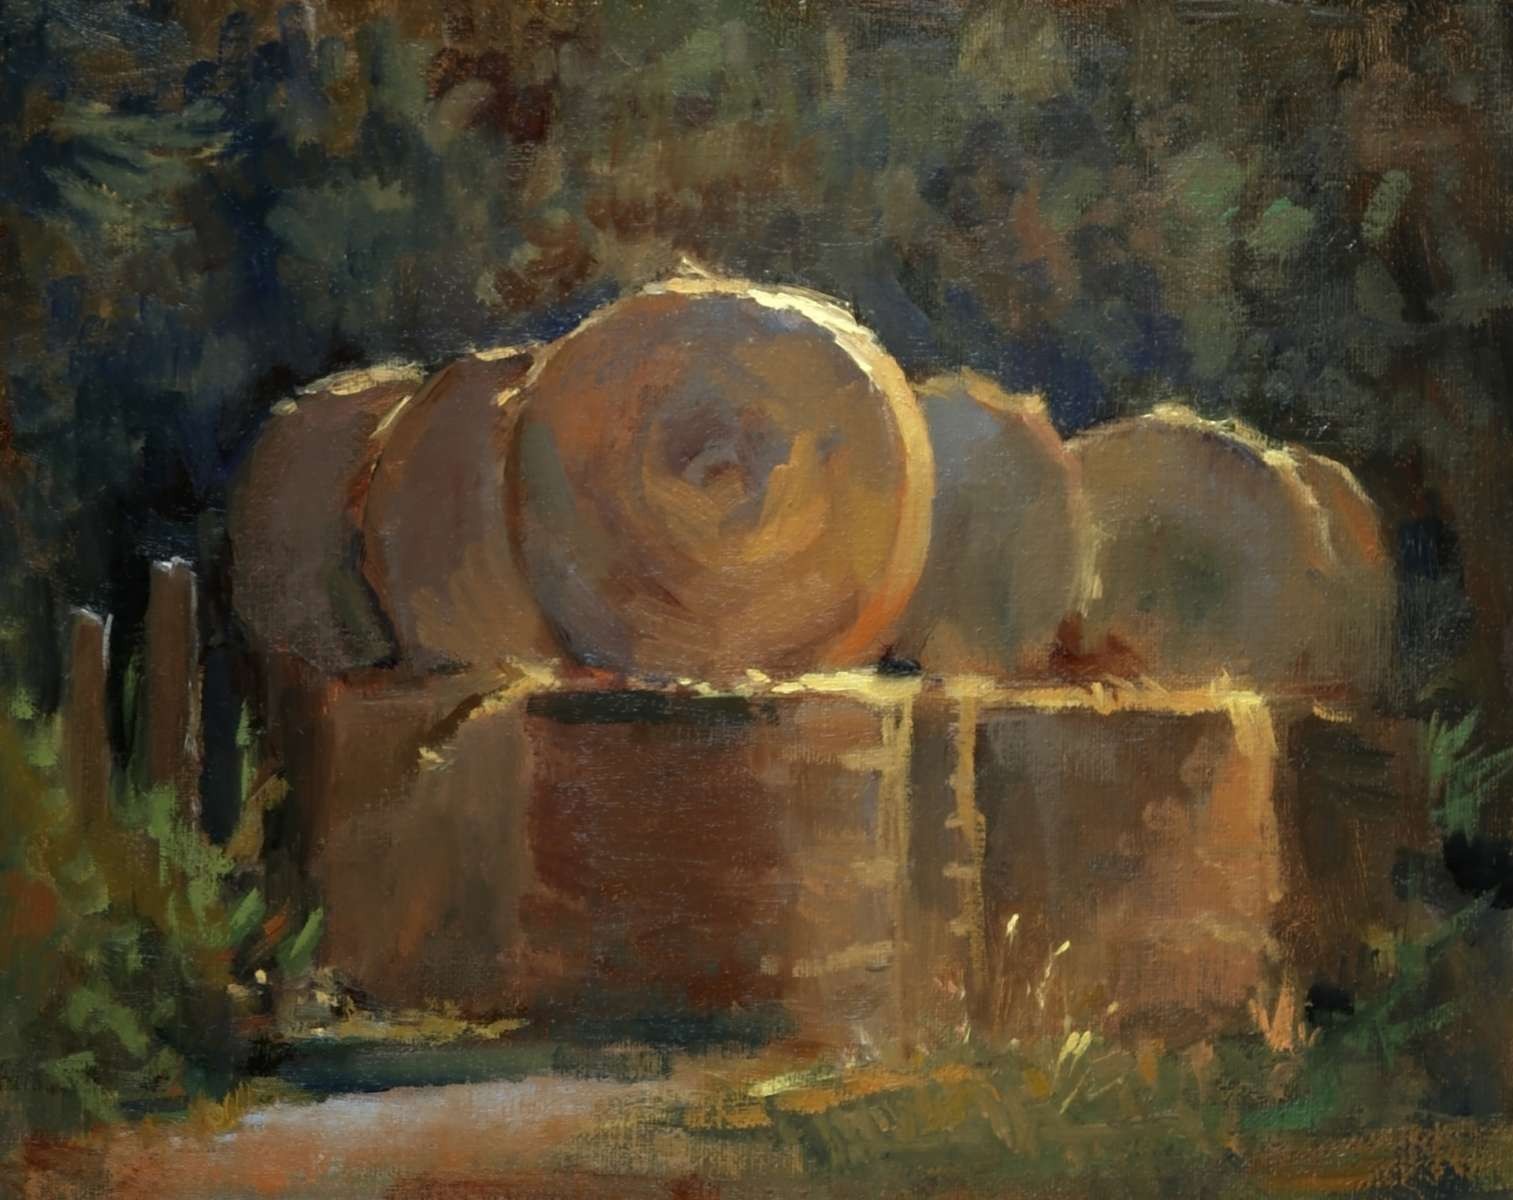 Hay Bales painting by artist Peter Campbel